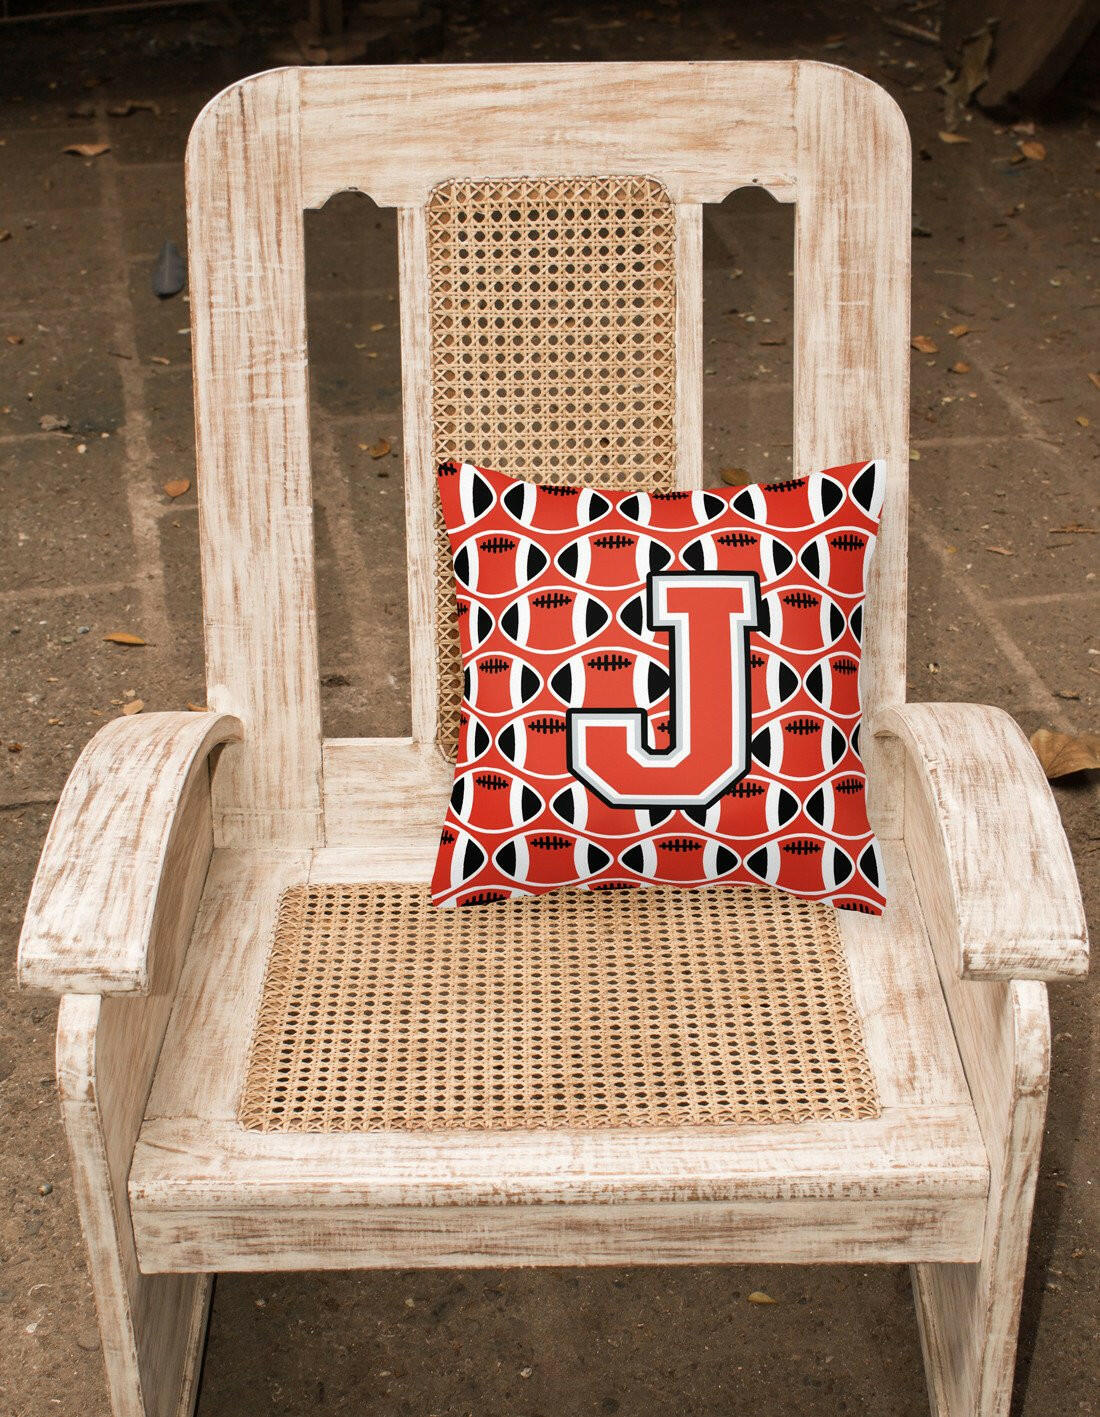 Letter J Football Scarlet and Grey Fabric Decorative Pillow CJ1067-JPW1414 by Caroline's Treasures